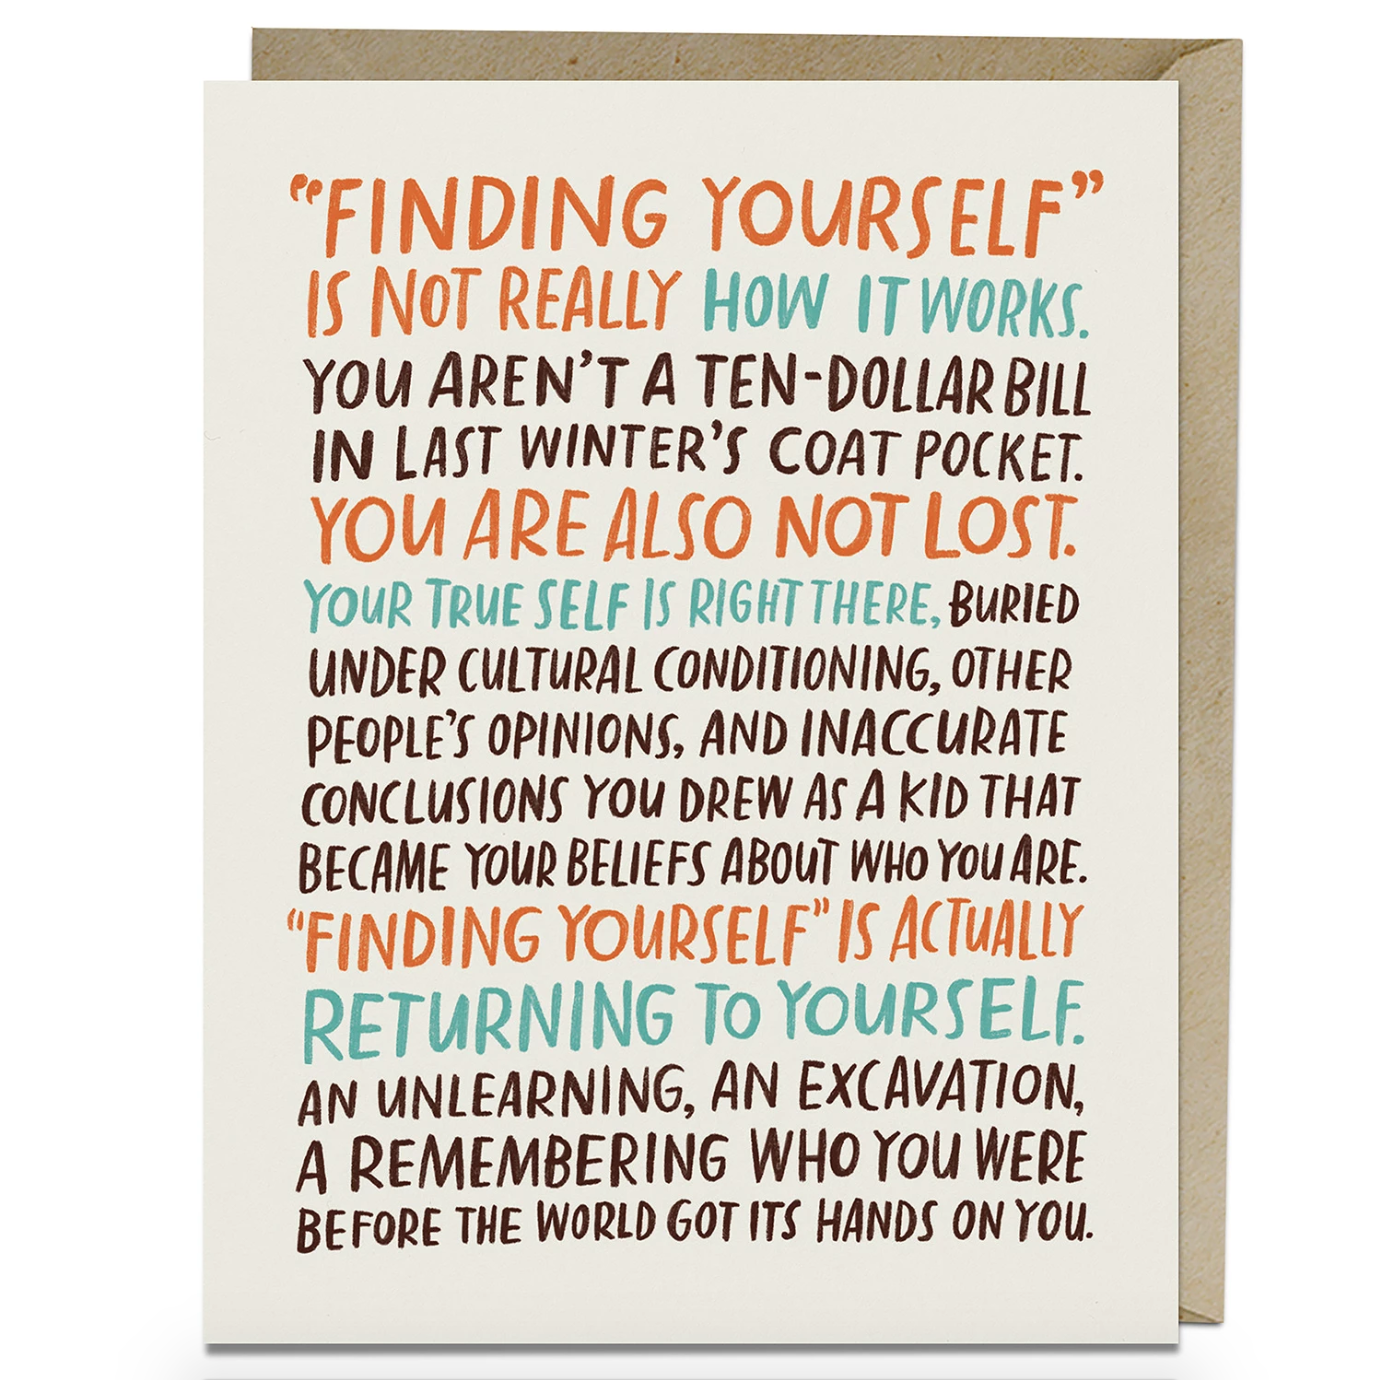 Emily McDowell & Friends - Finding Yourself Card